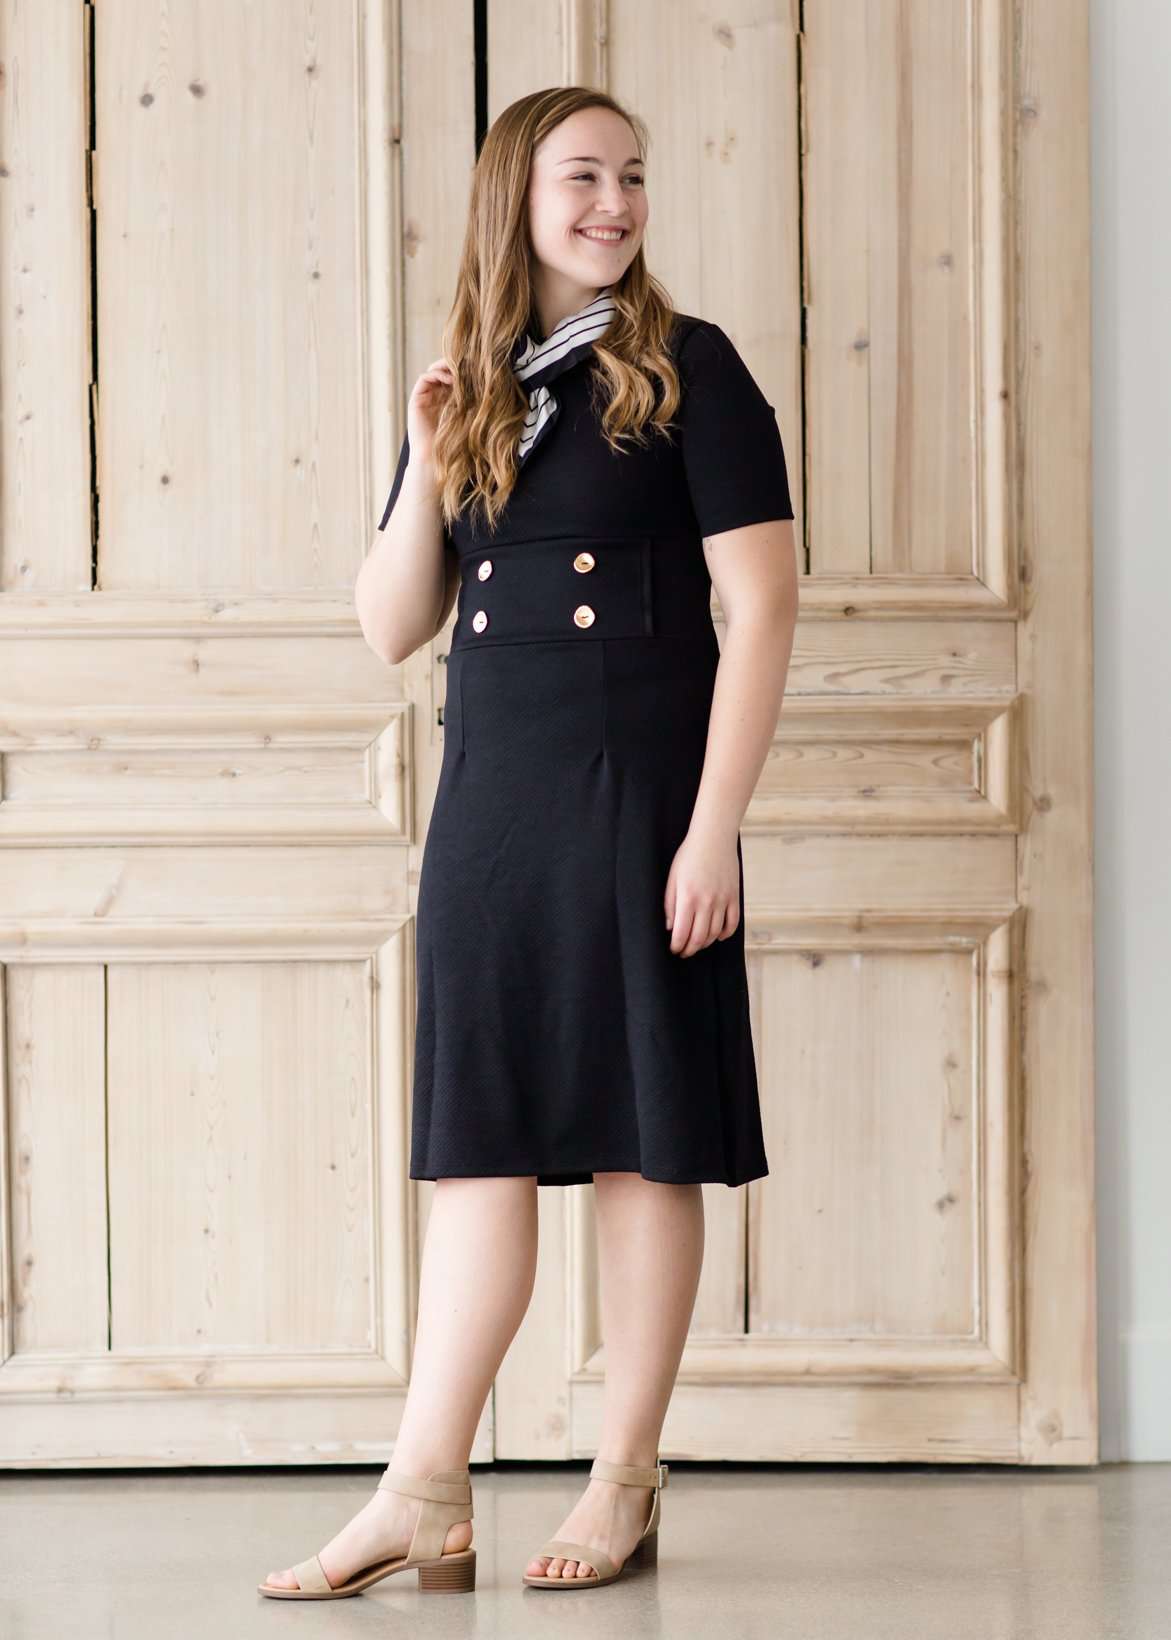 modest black midi dress with gold button accent